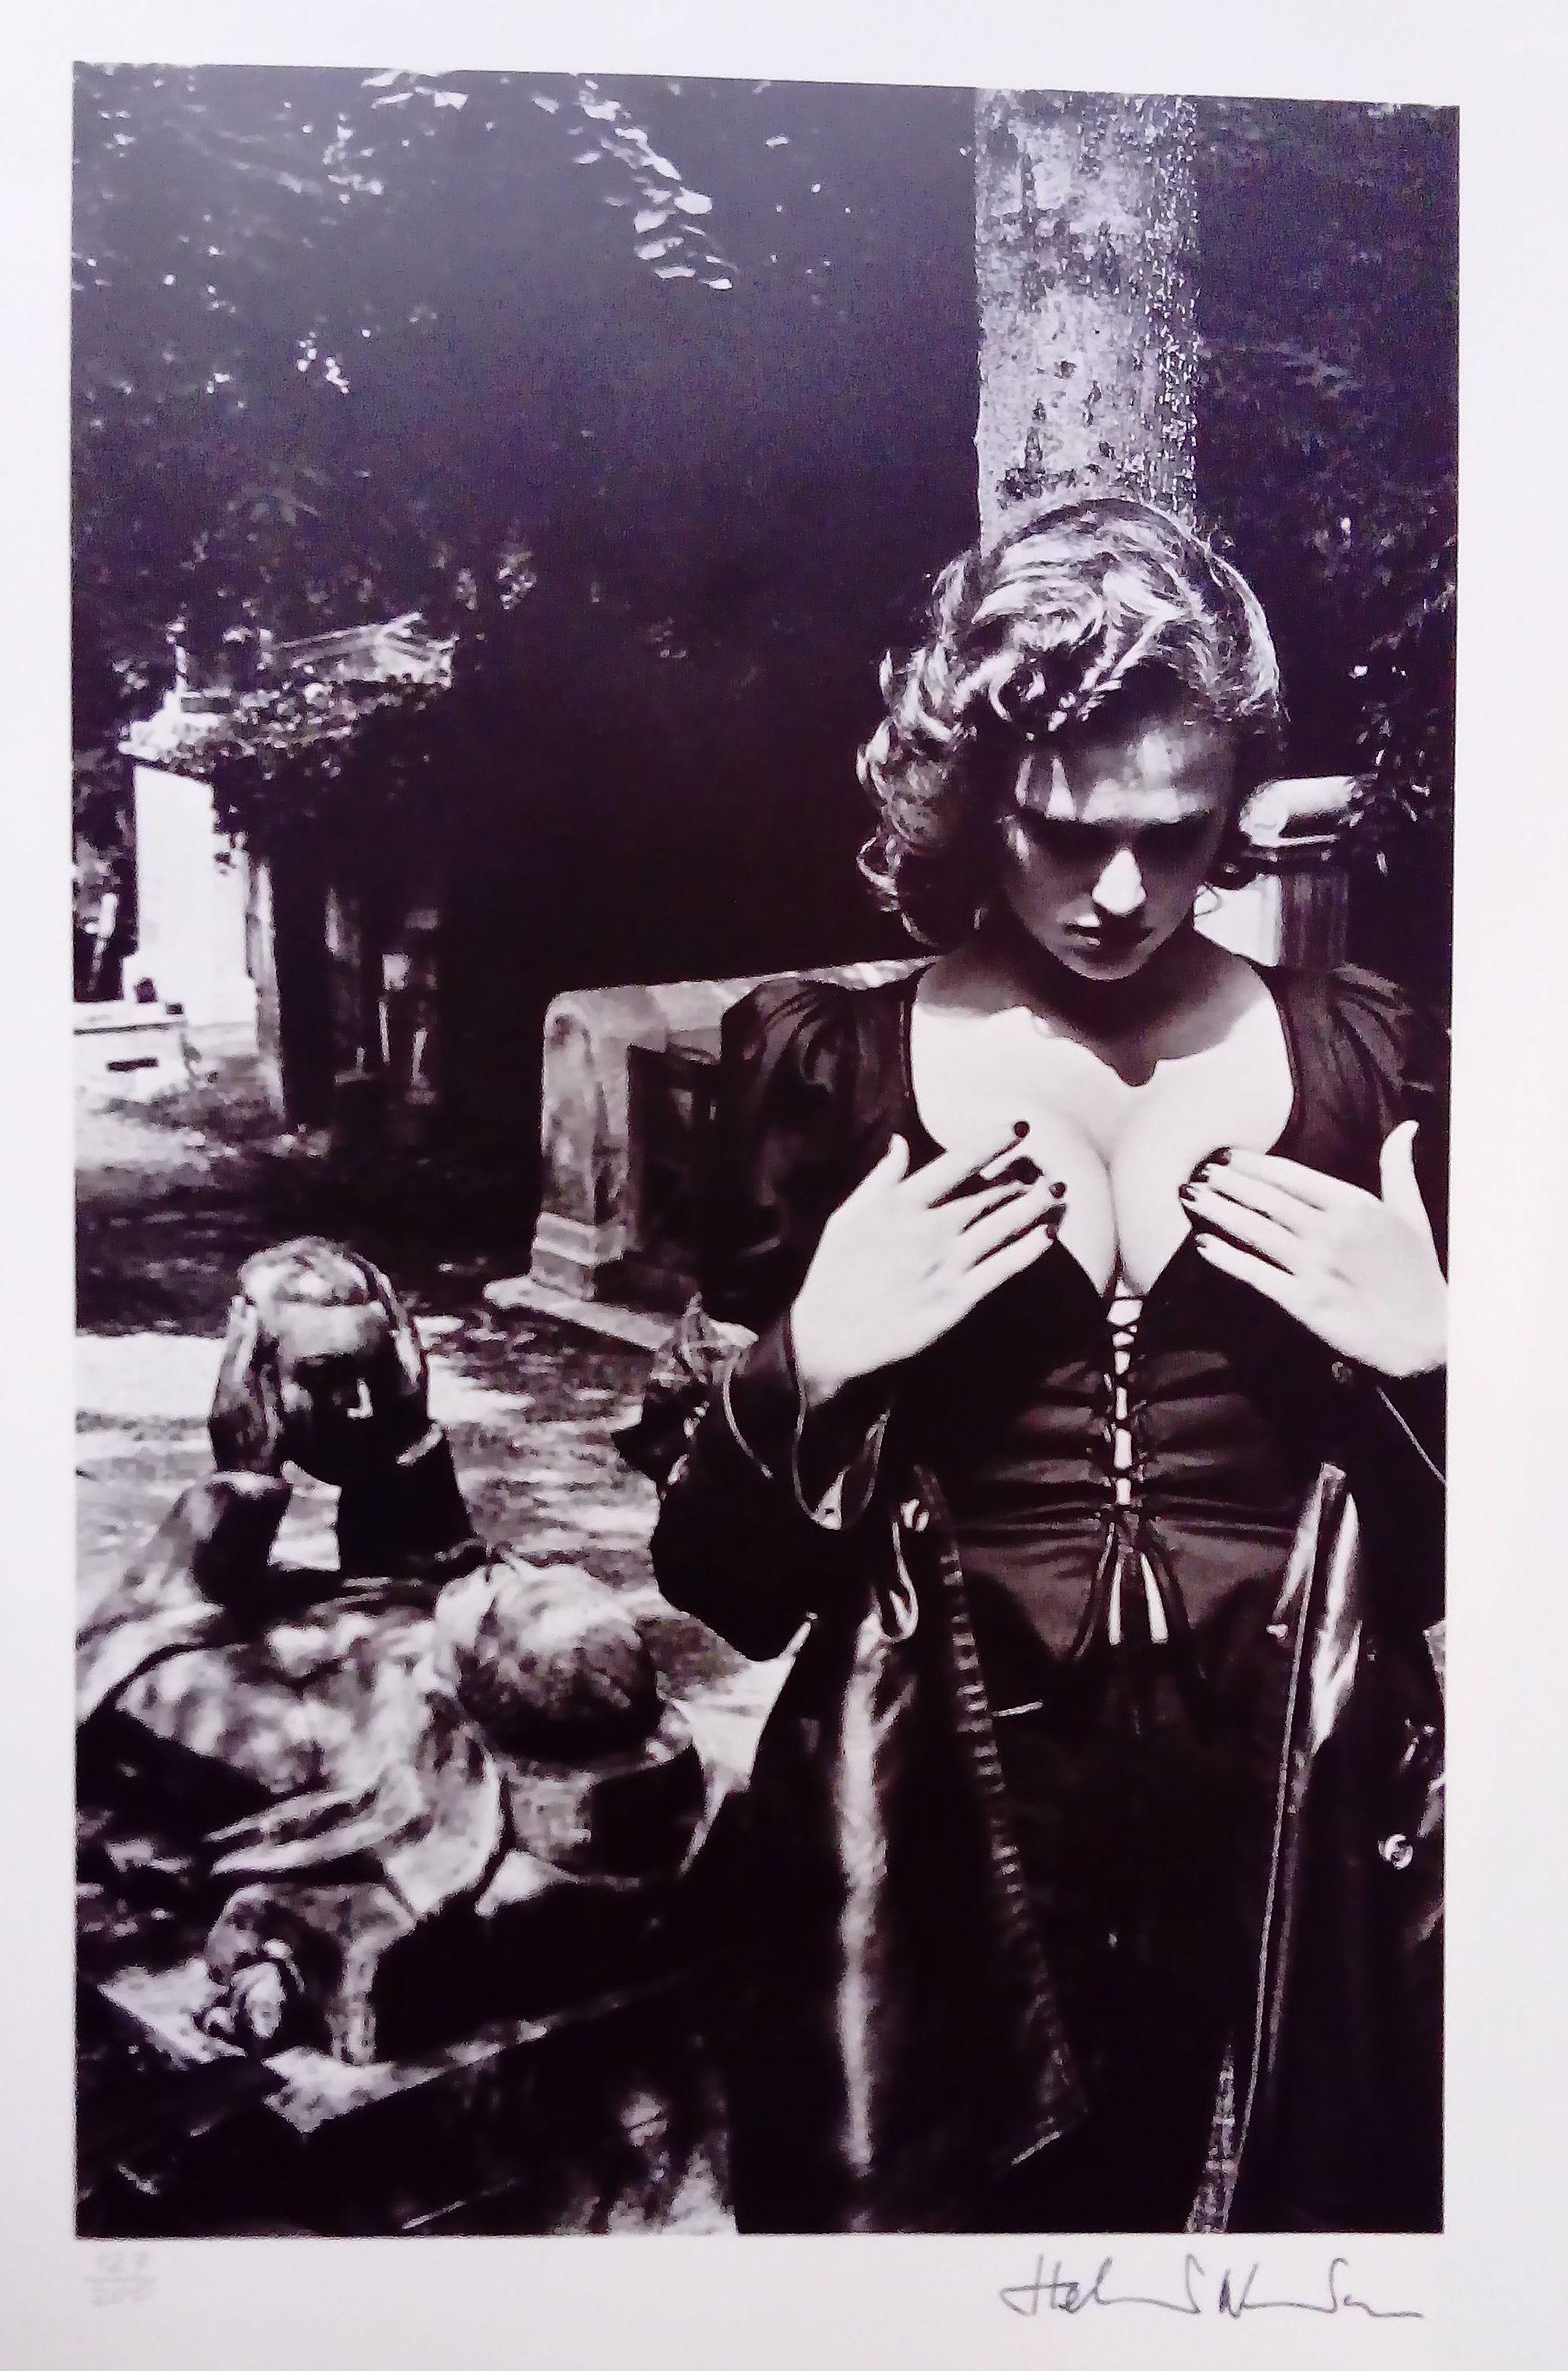 High quality photolithograph from "Helmut Newton: Special Collection: 24 Photo Lithos" (London: Quartet Books, 1980)
Deluxe edition of 200
Numbered in pencil
Printed signature on the reverse
Printed title and other annotations on the reverse
In very